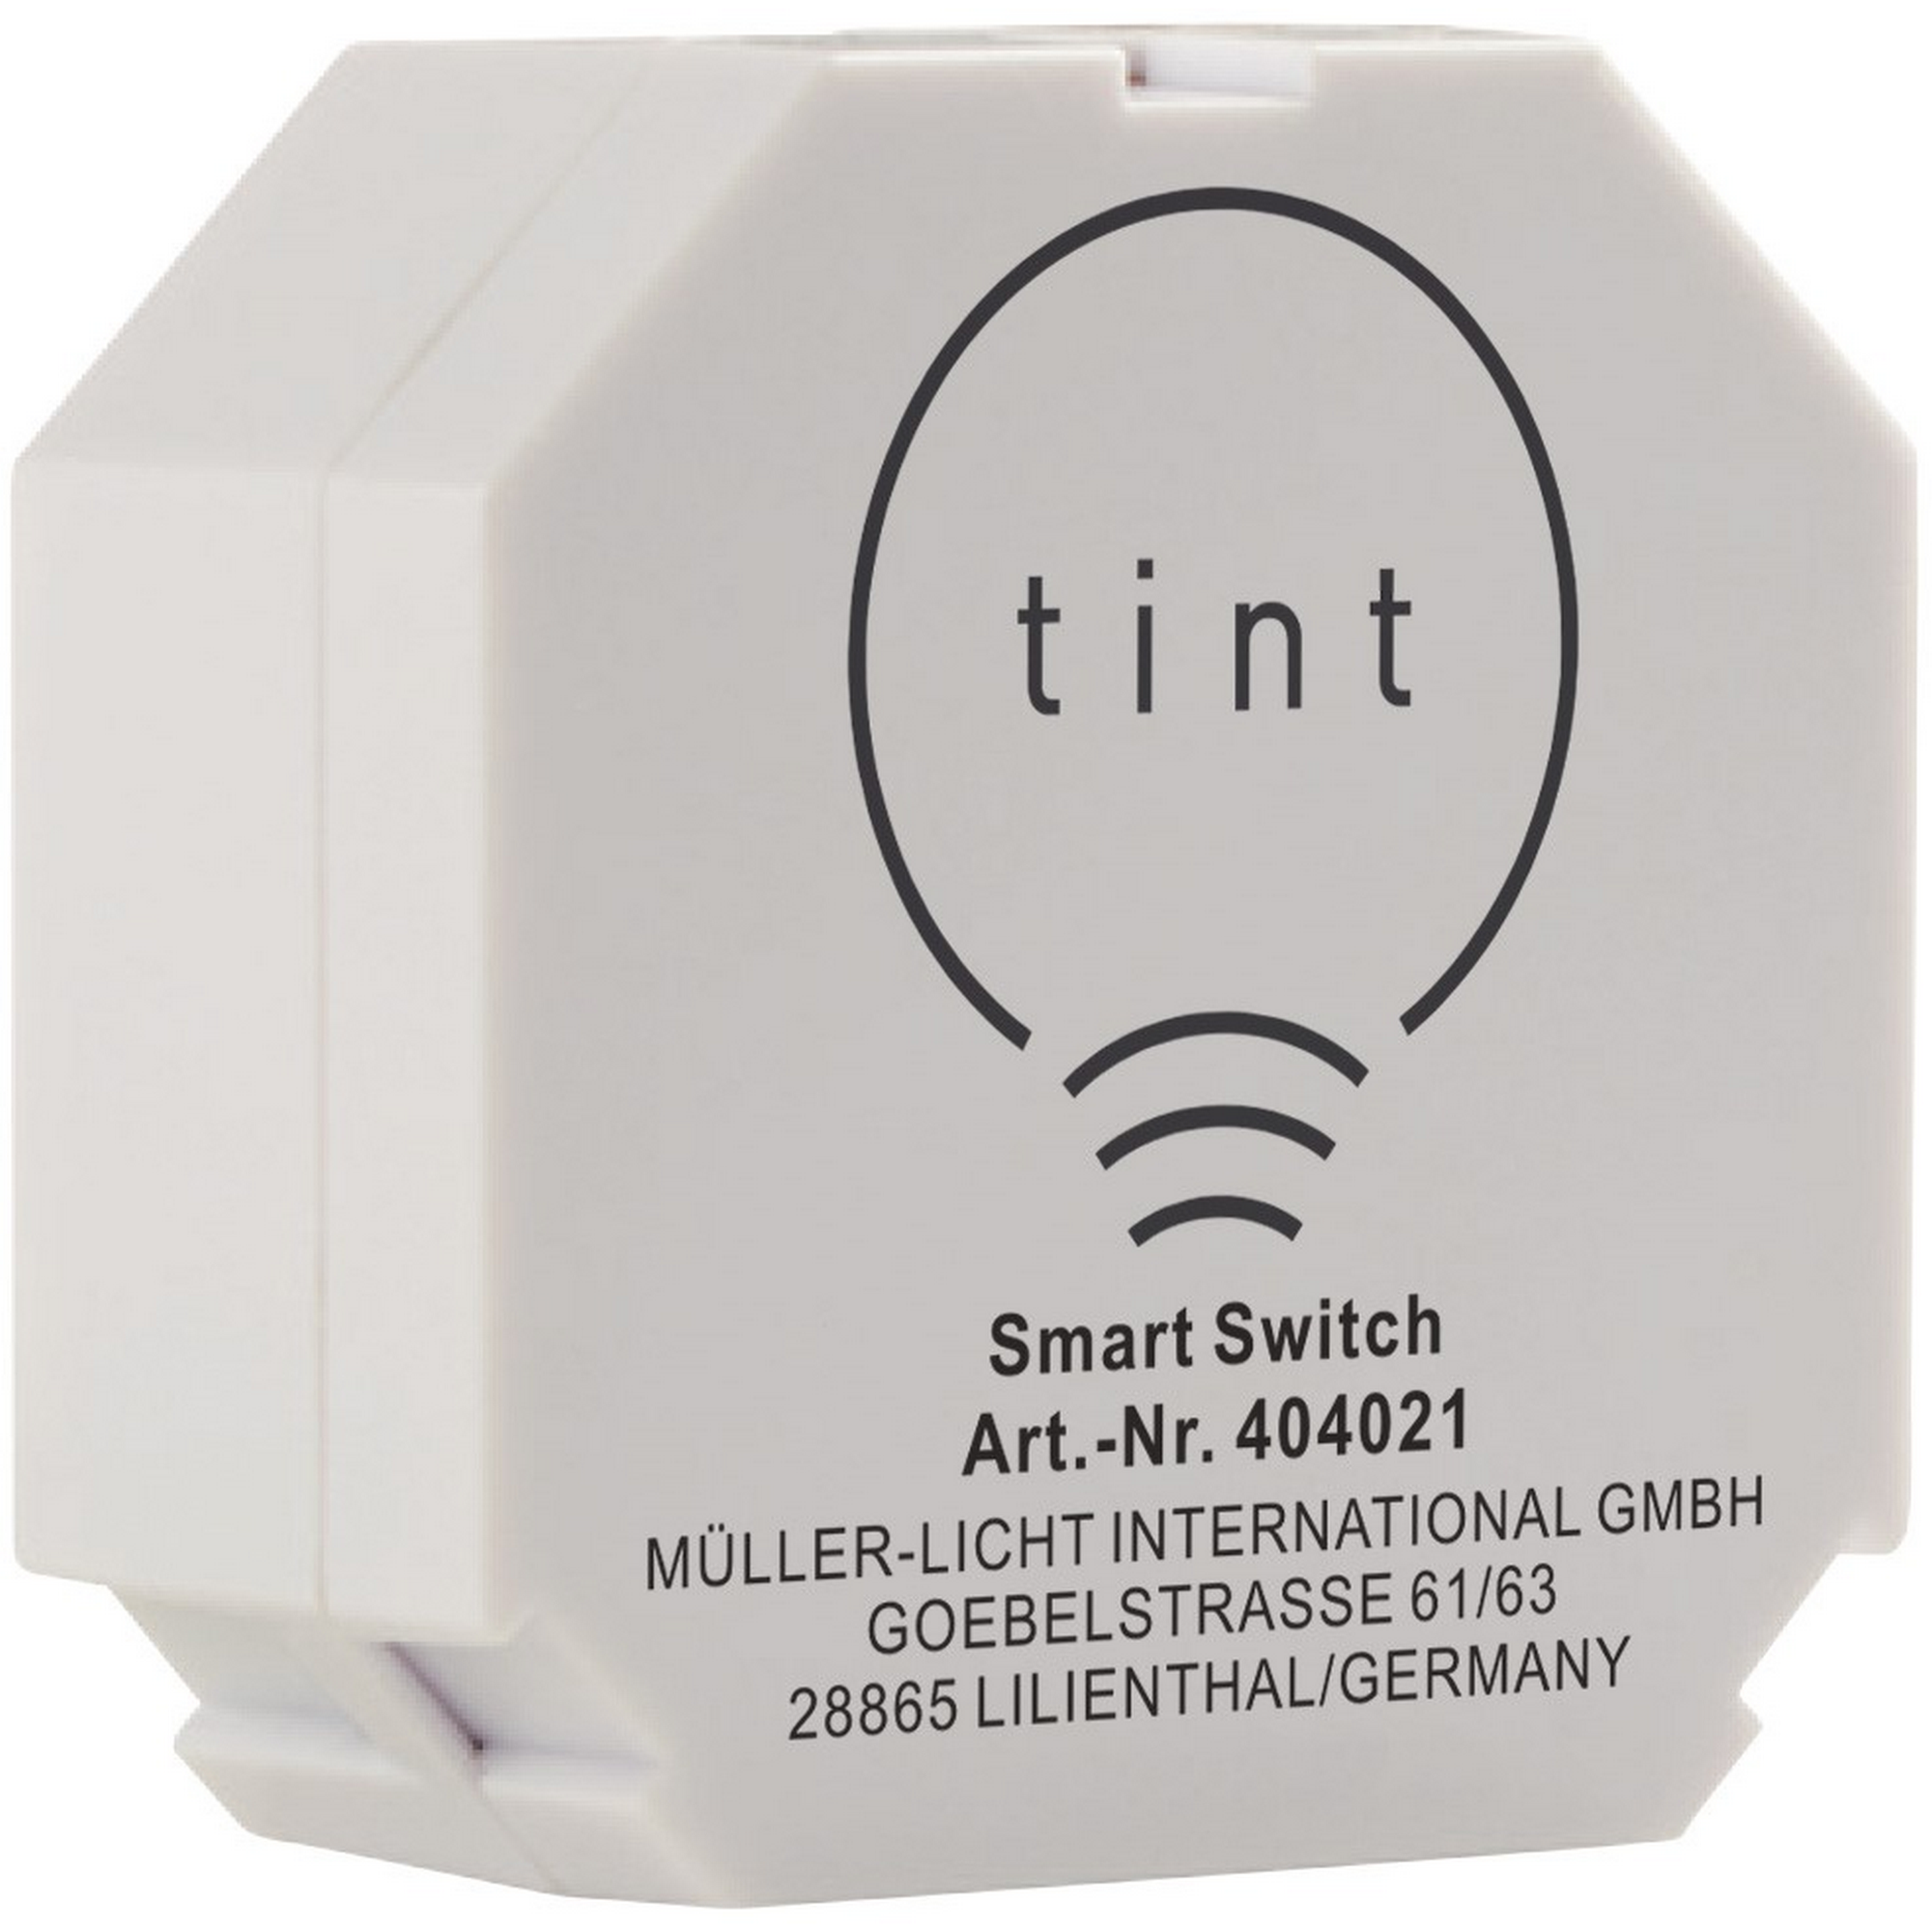 tint Smart Switch Funkschalter + product picture